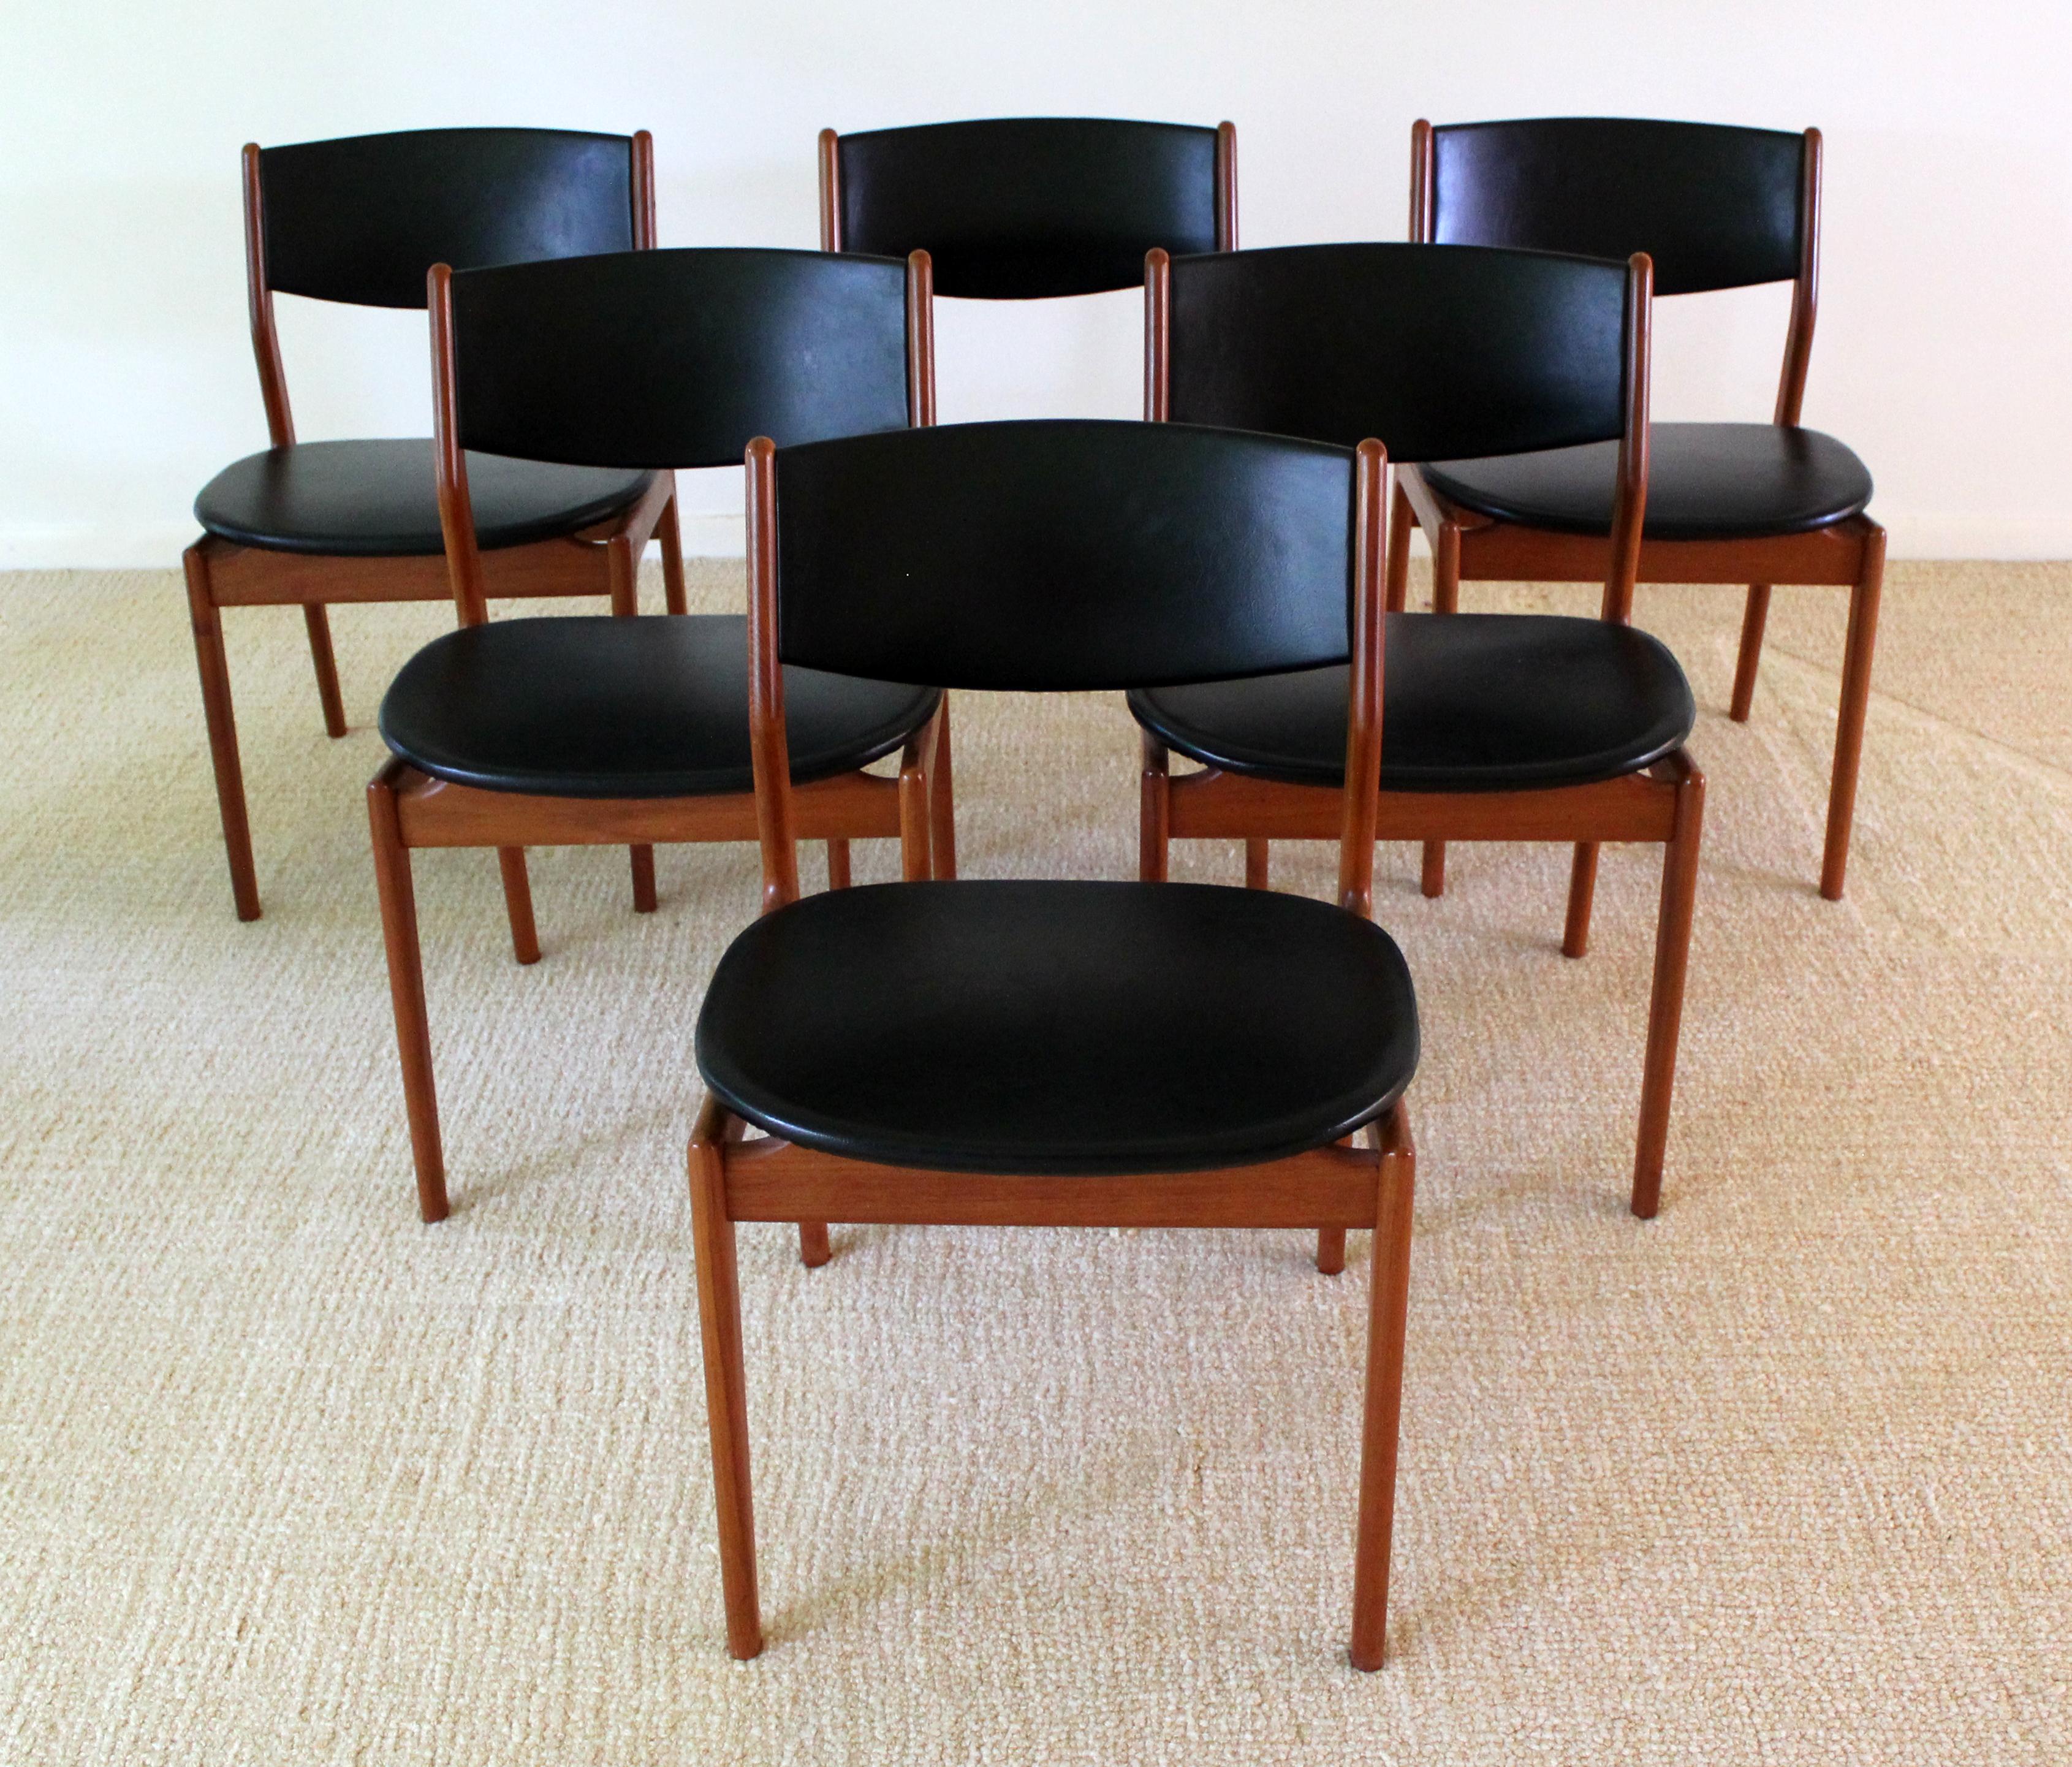 Mid-Century Modern Teak Expandable Dining Set Table, 2 Leaves, 6 Chairs Danish 2